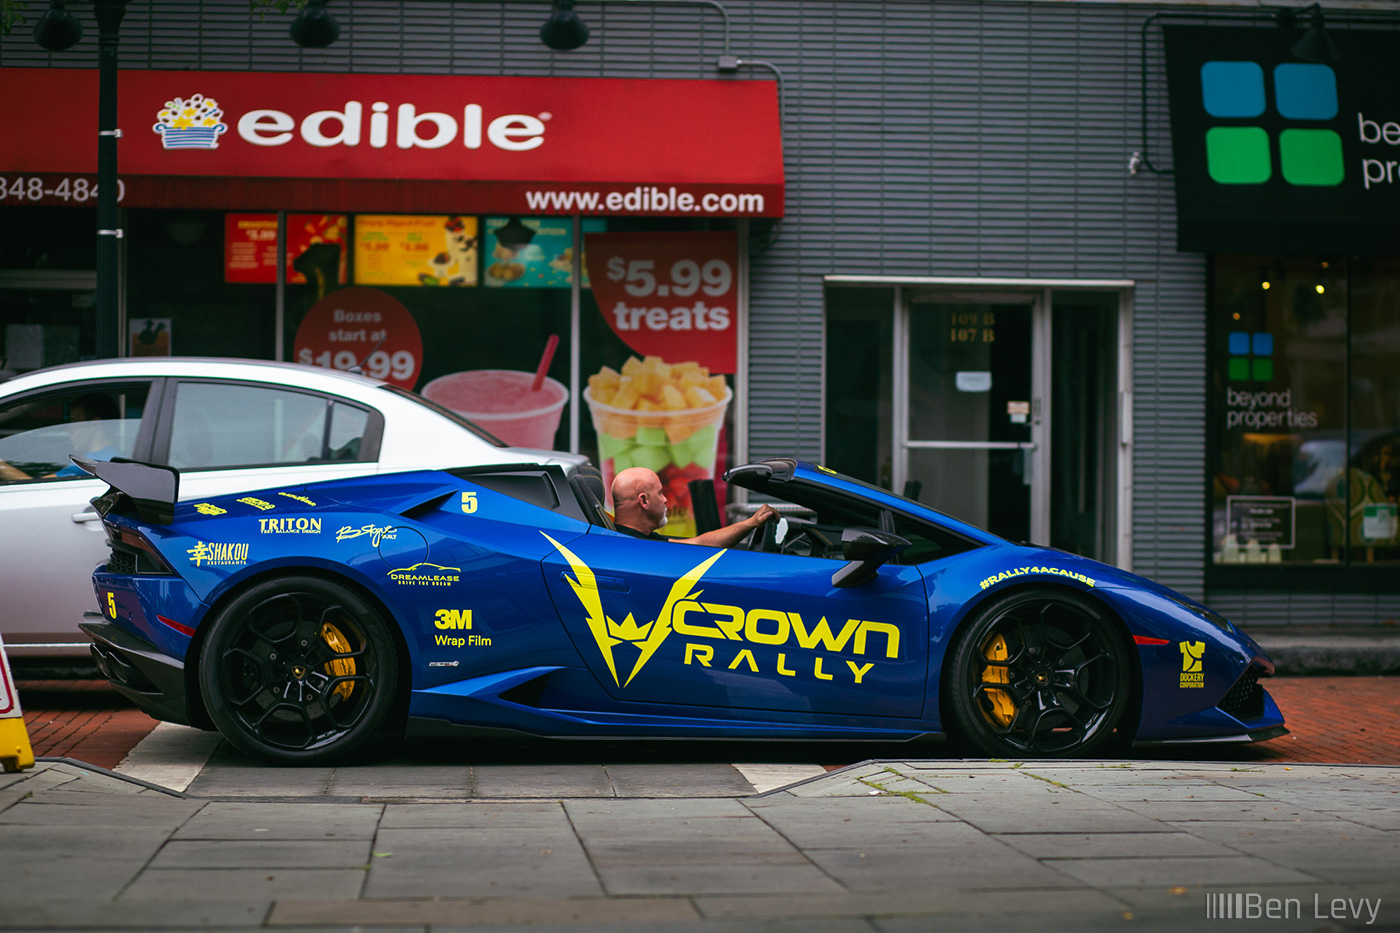 Lamborghini Aventador Roadster with Crown Rally Stickers